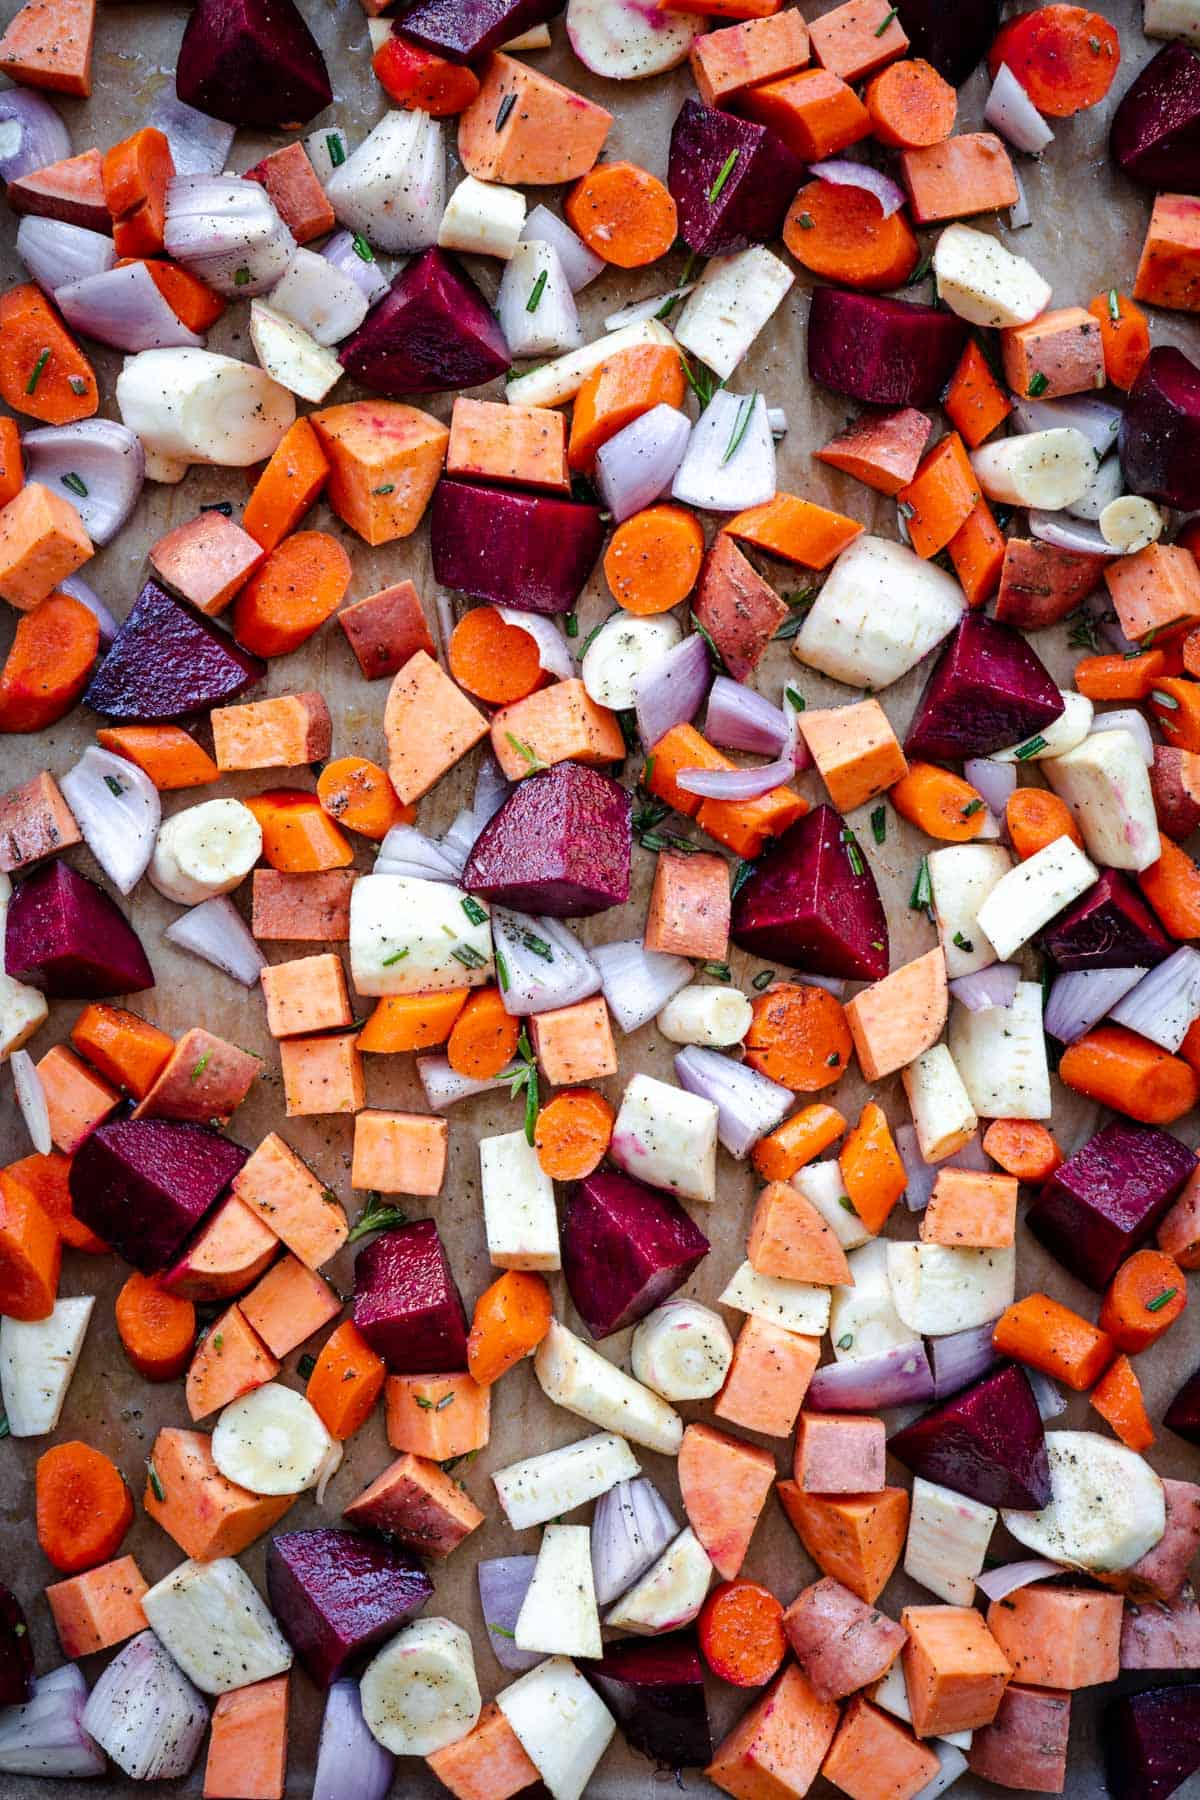 carrots, beets, parnips, sweet potatoes, shallots on a baking tray ready to be tossed in olive oil and roasted